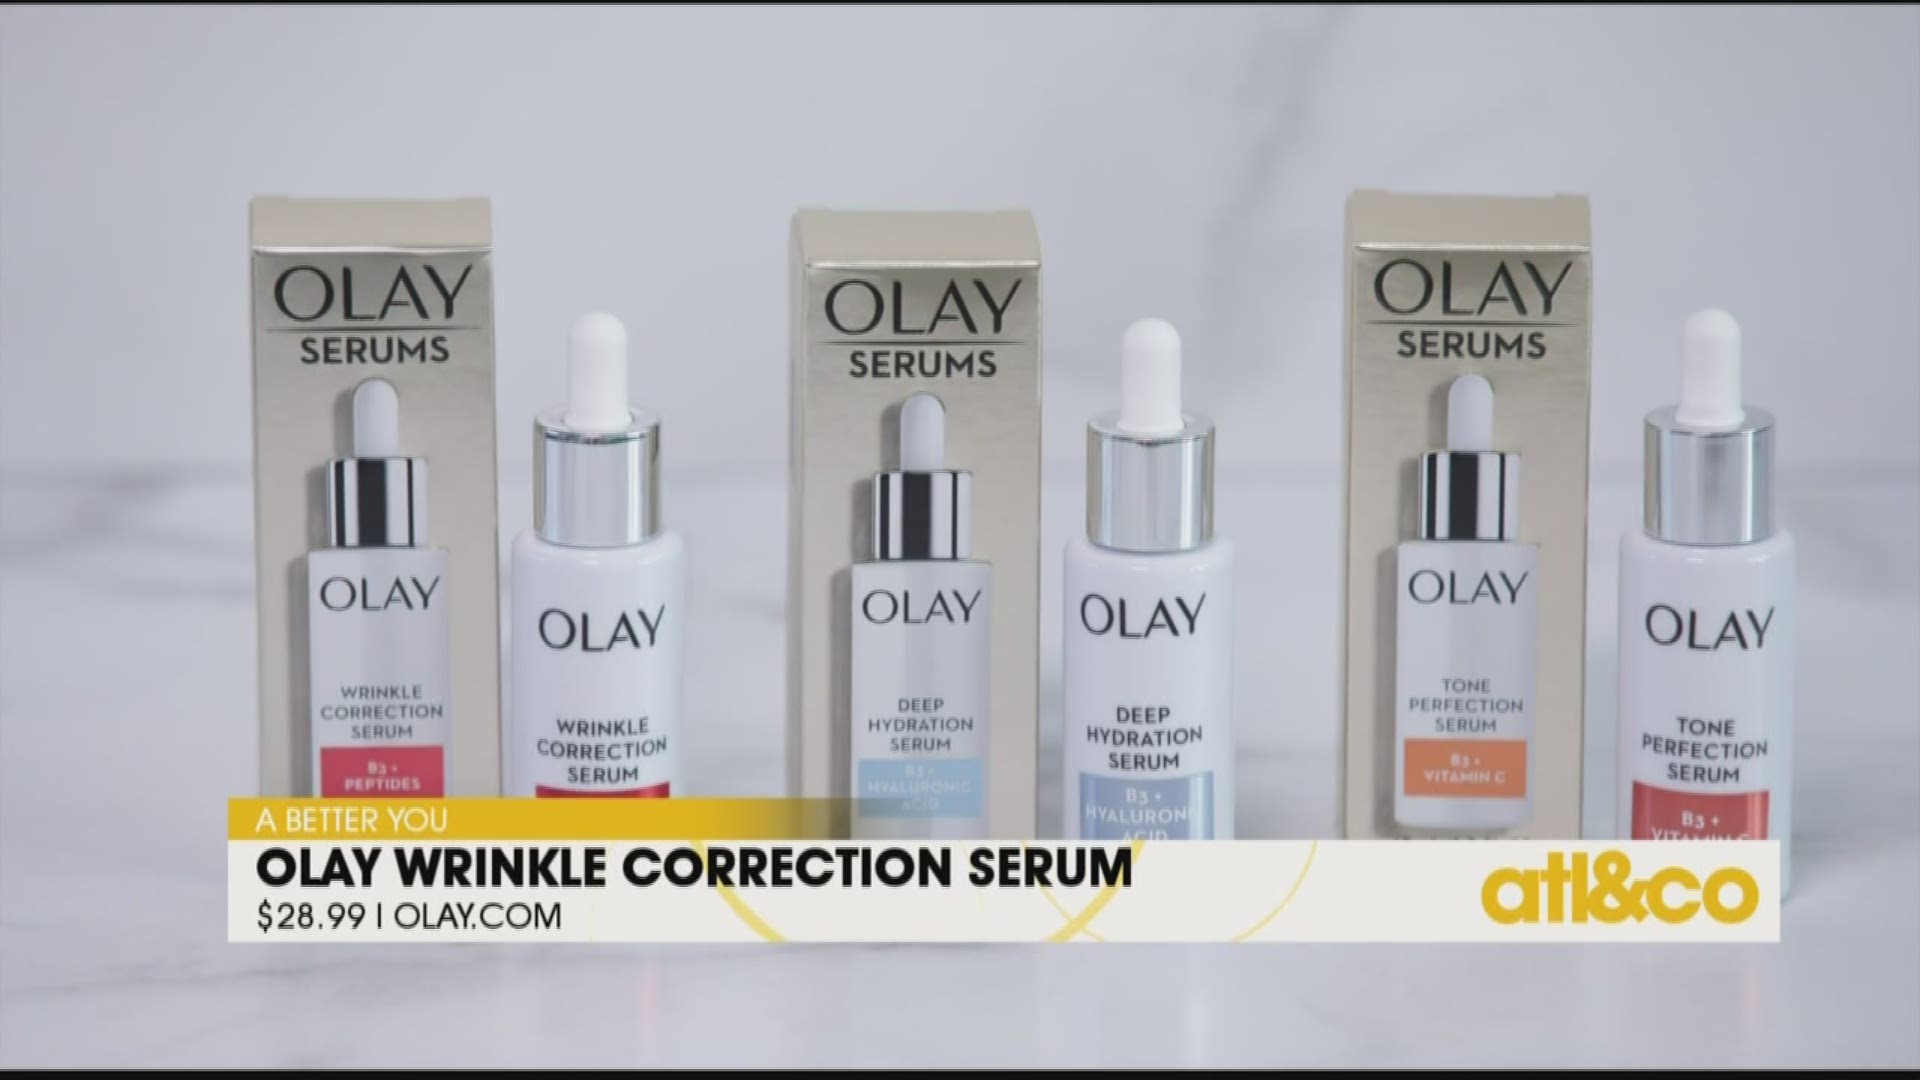 Is winter giving you the beauty blues? Lifestyle expert Limor Suss shares some of her favorite winter wellness essentials, Olay Wrinkle Correction Serum included!